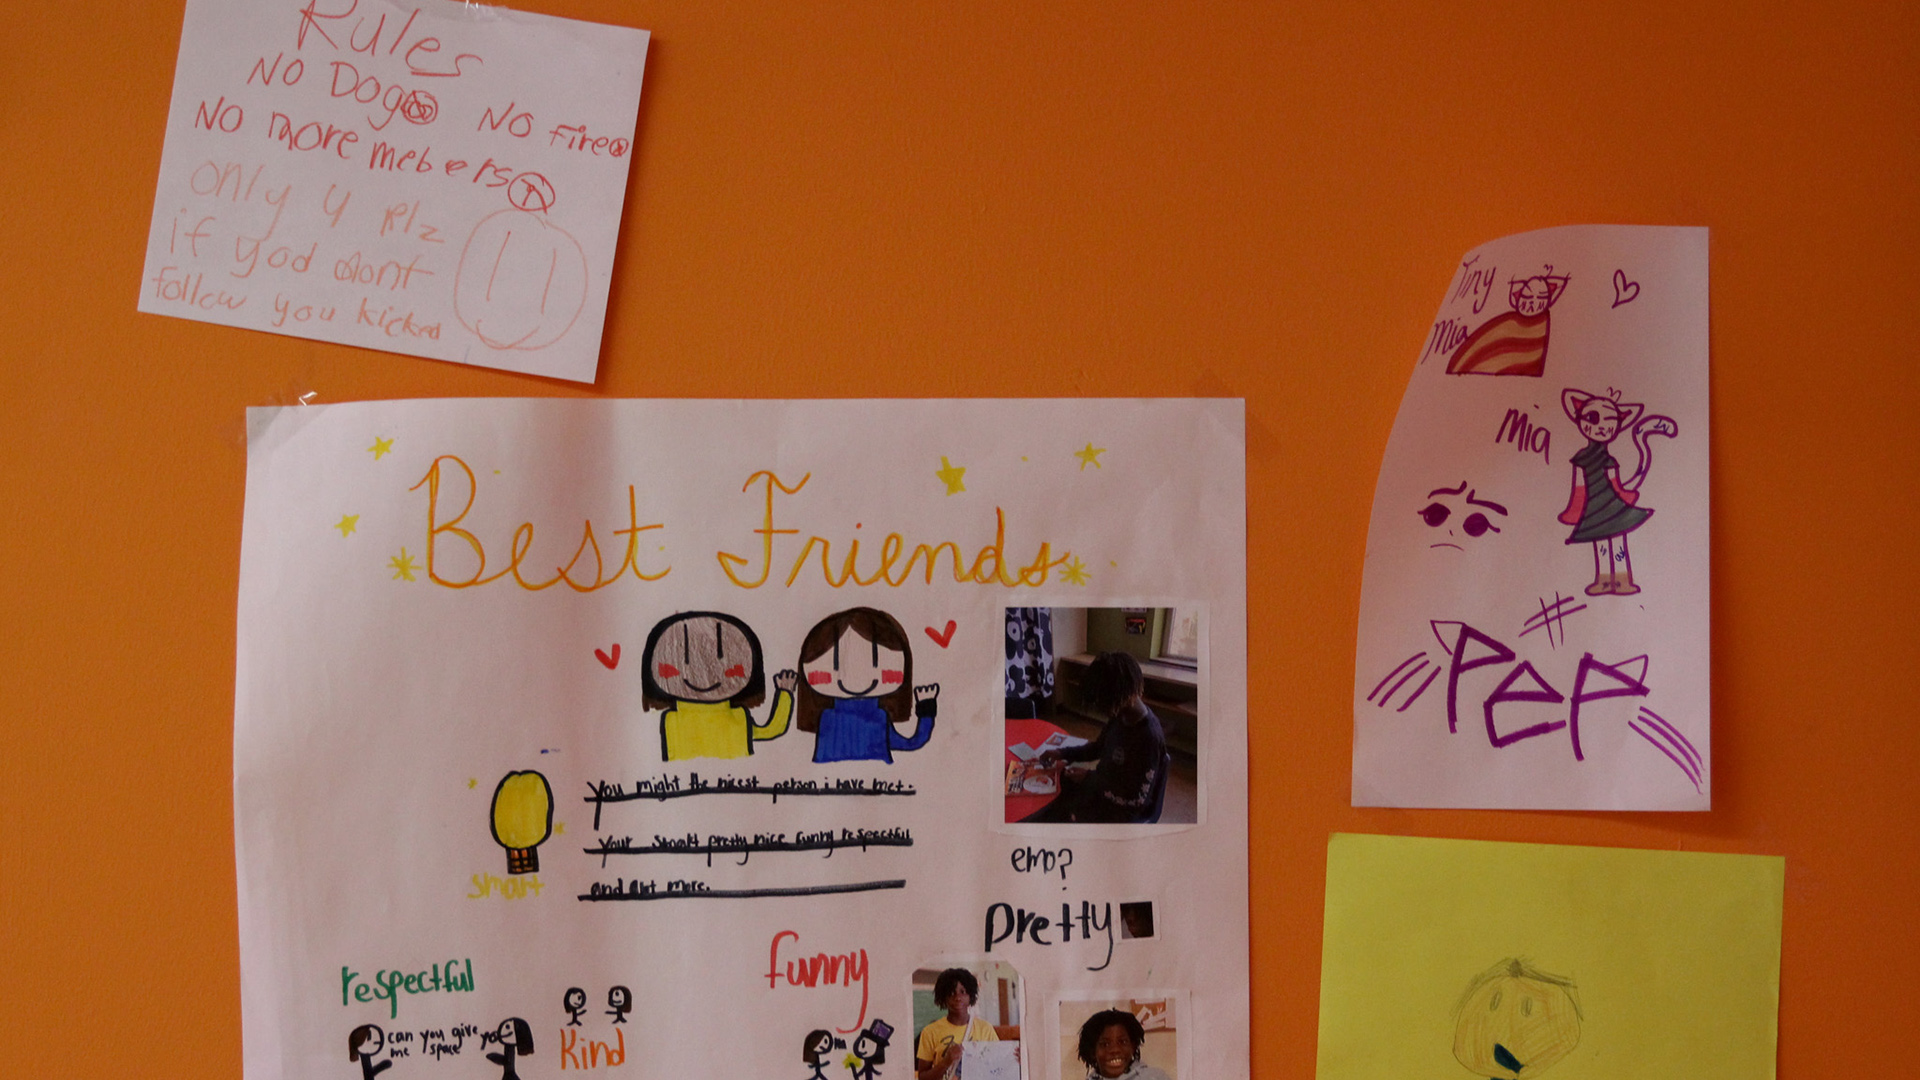 Multiple pieces of paper with children's drawings, writing and photos are taped to a painted wall.